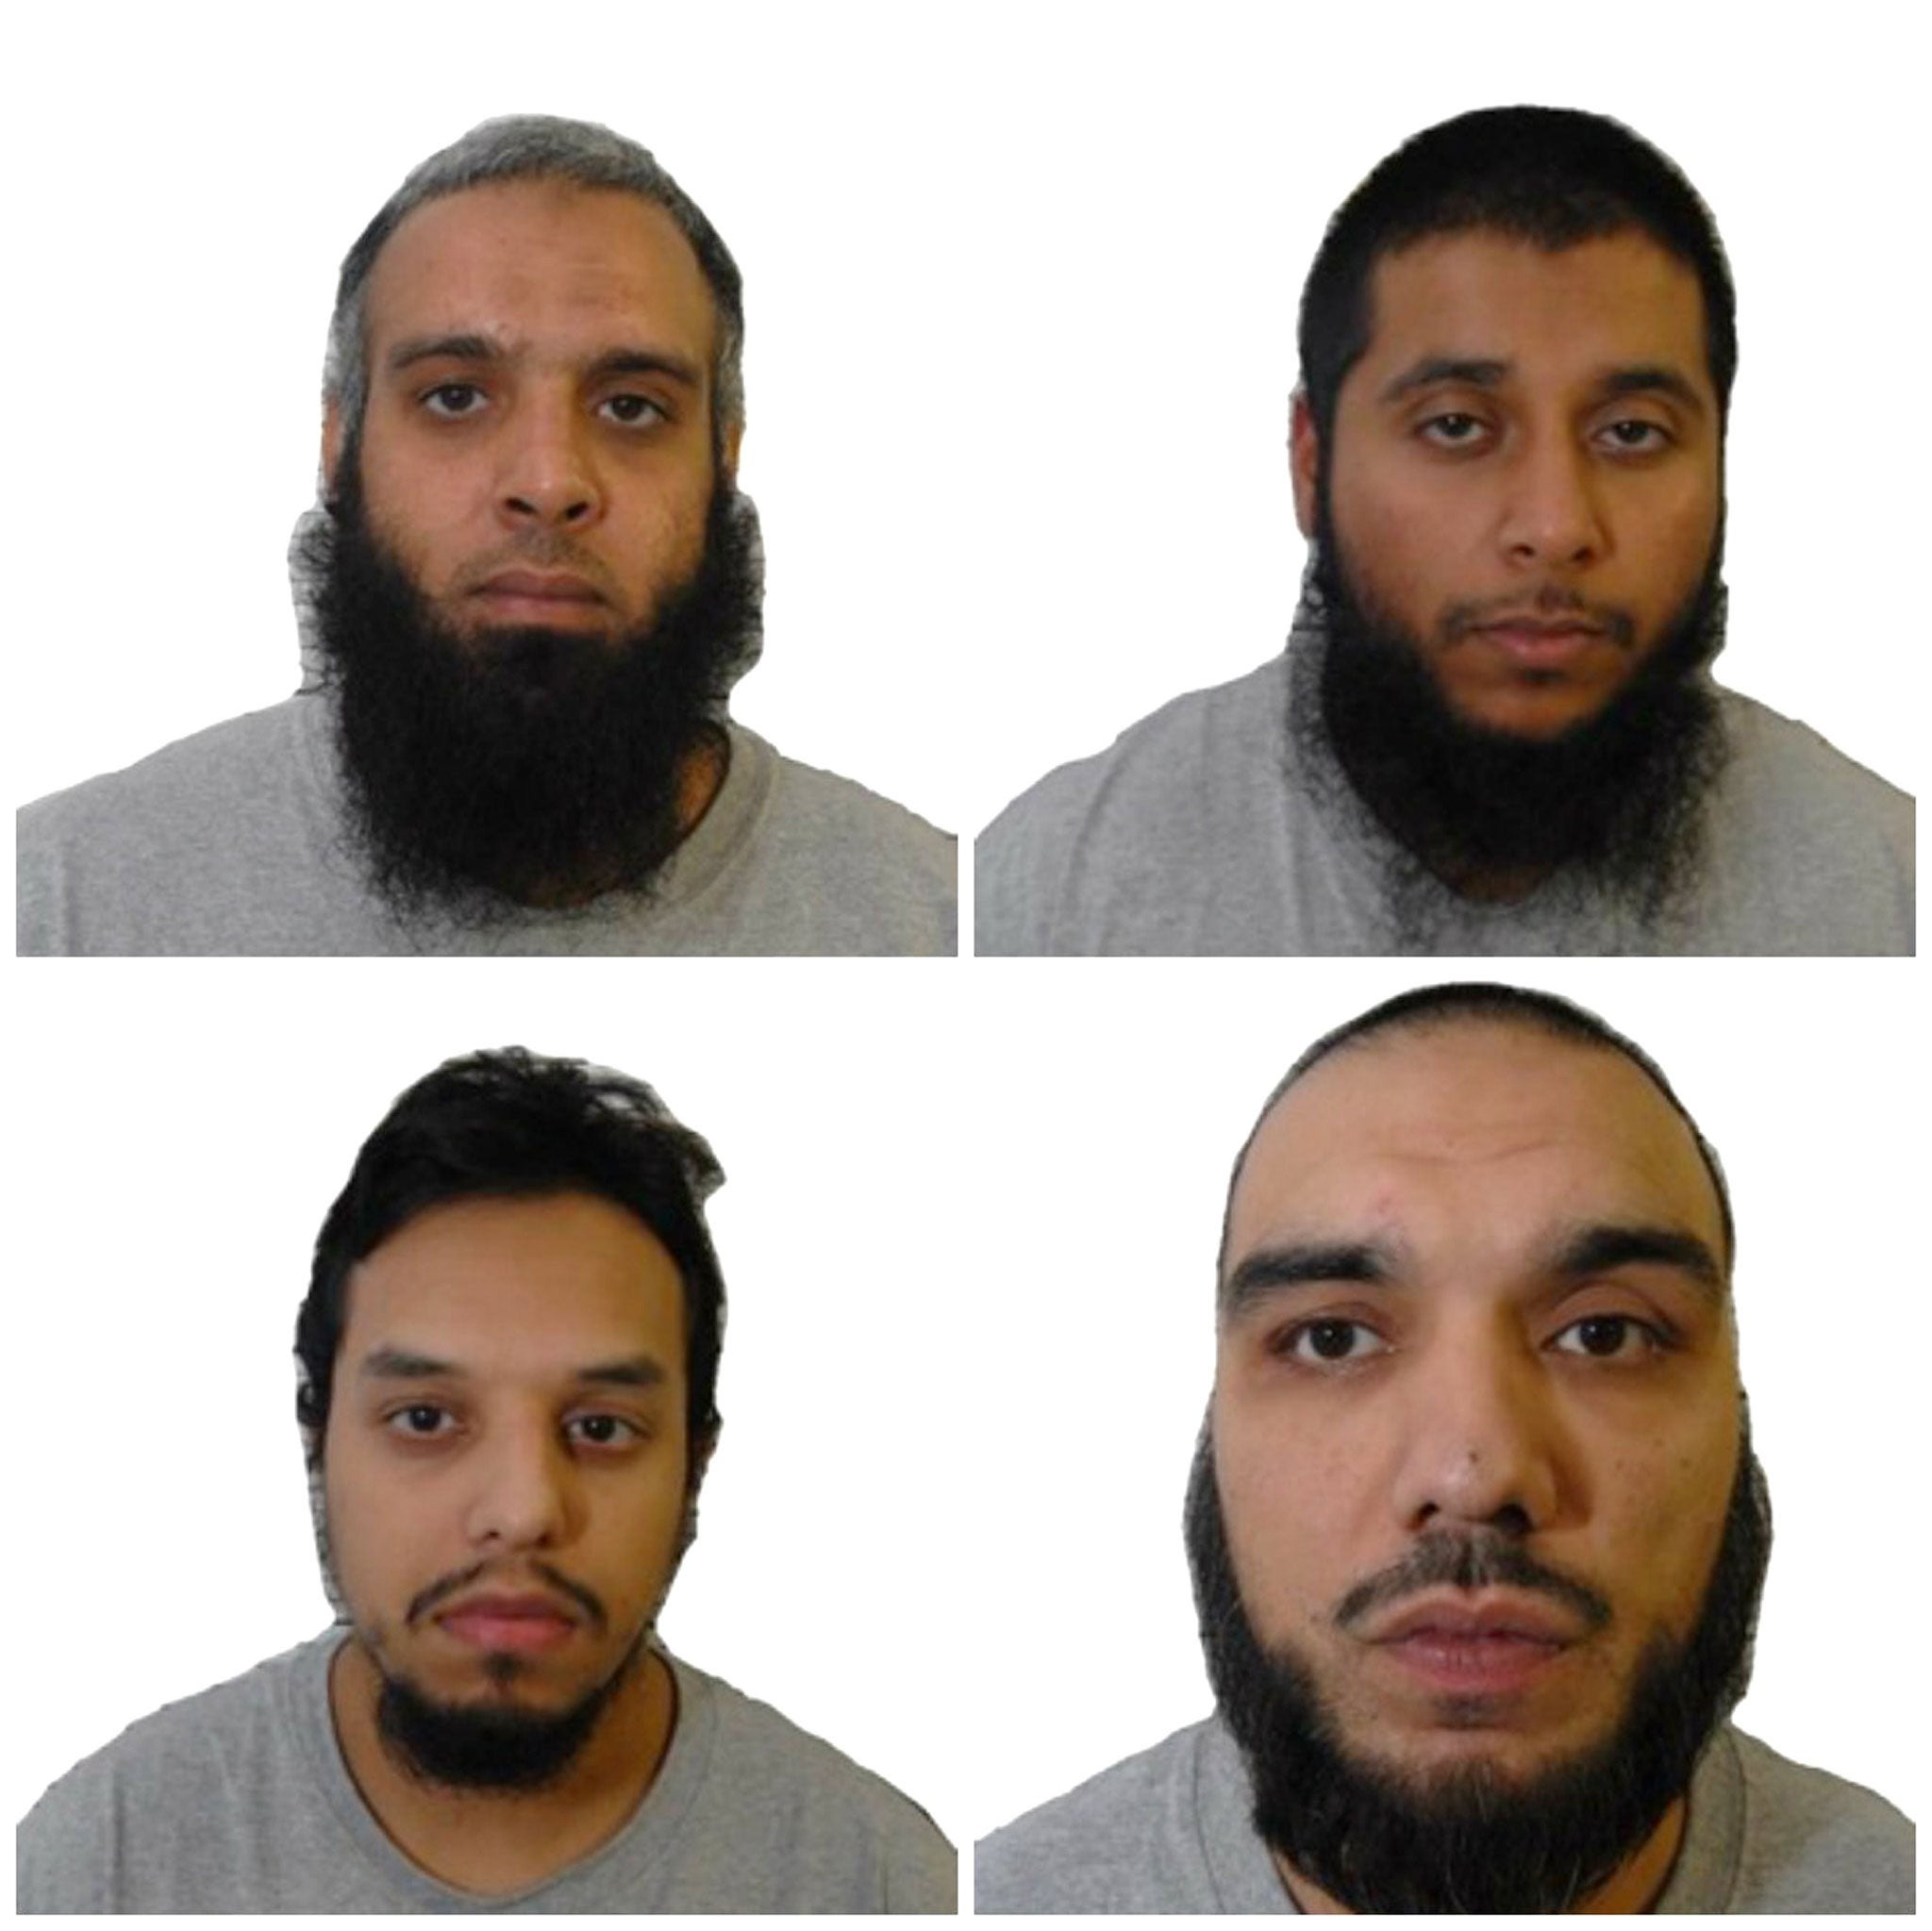 Three of the ‘Three Musketeers’ terror plotters had spent time in prison together